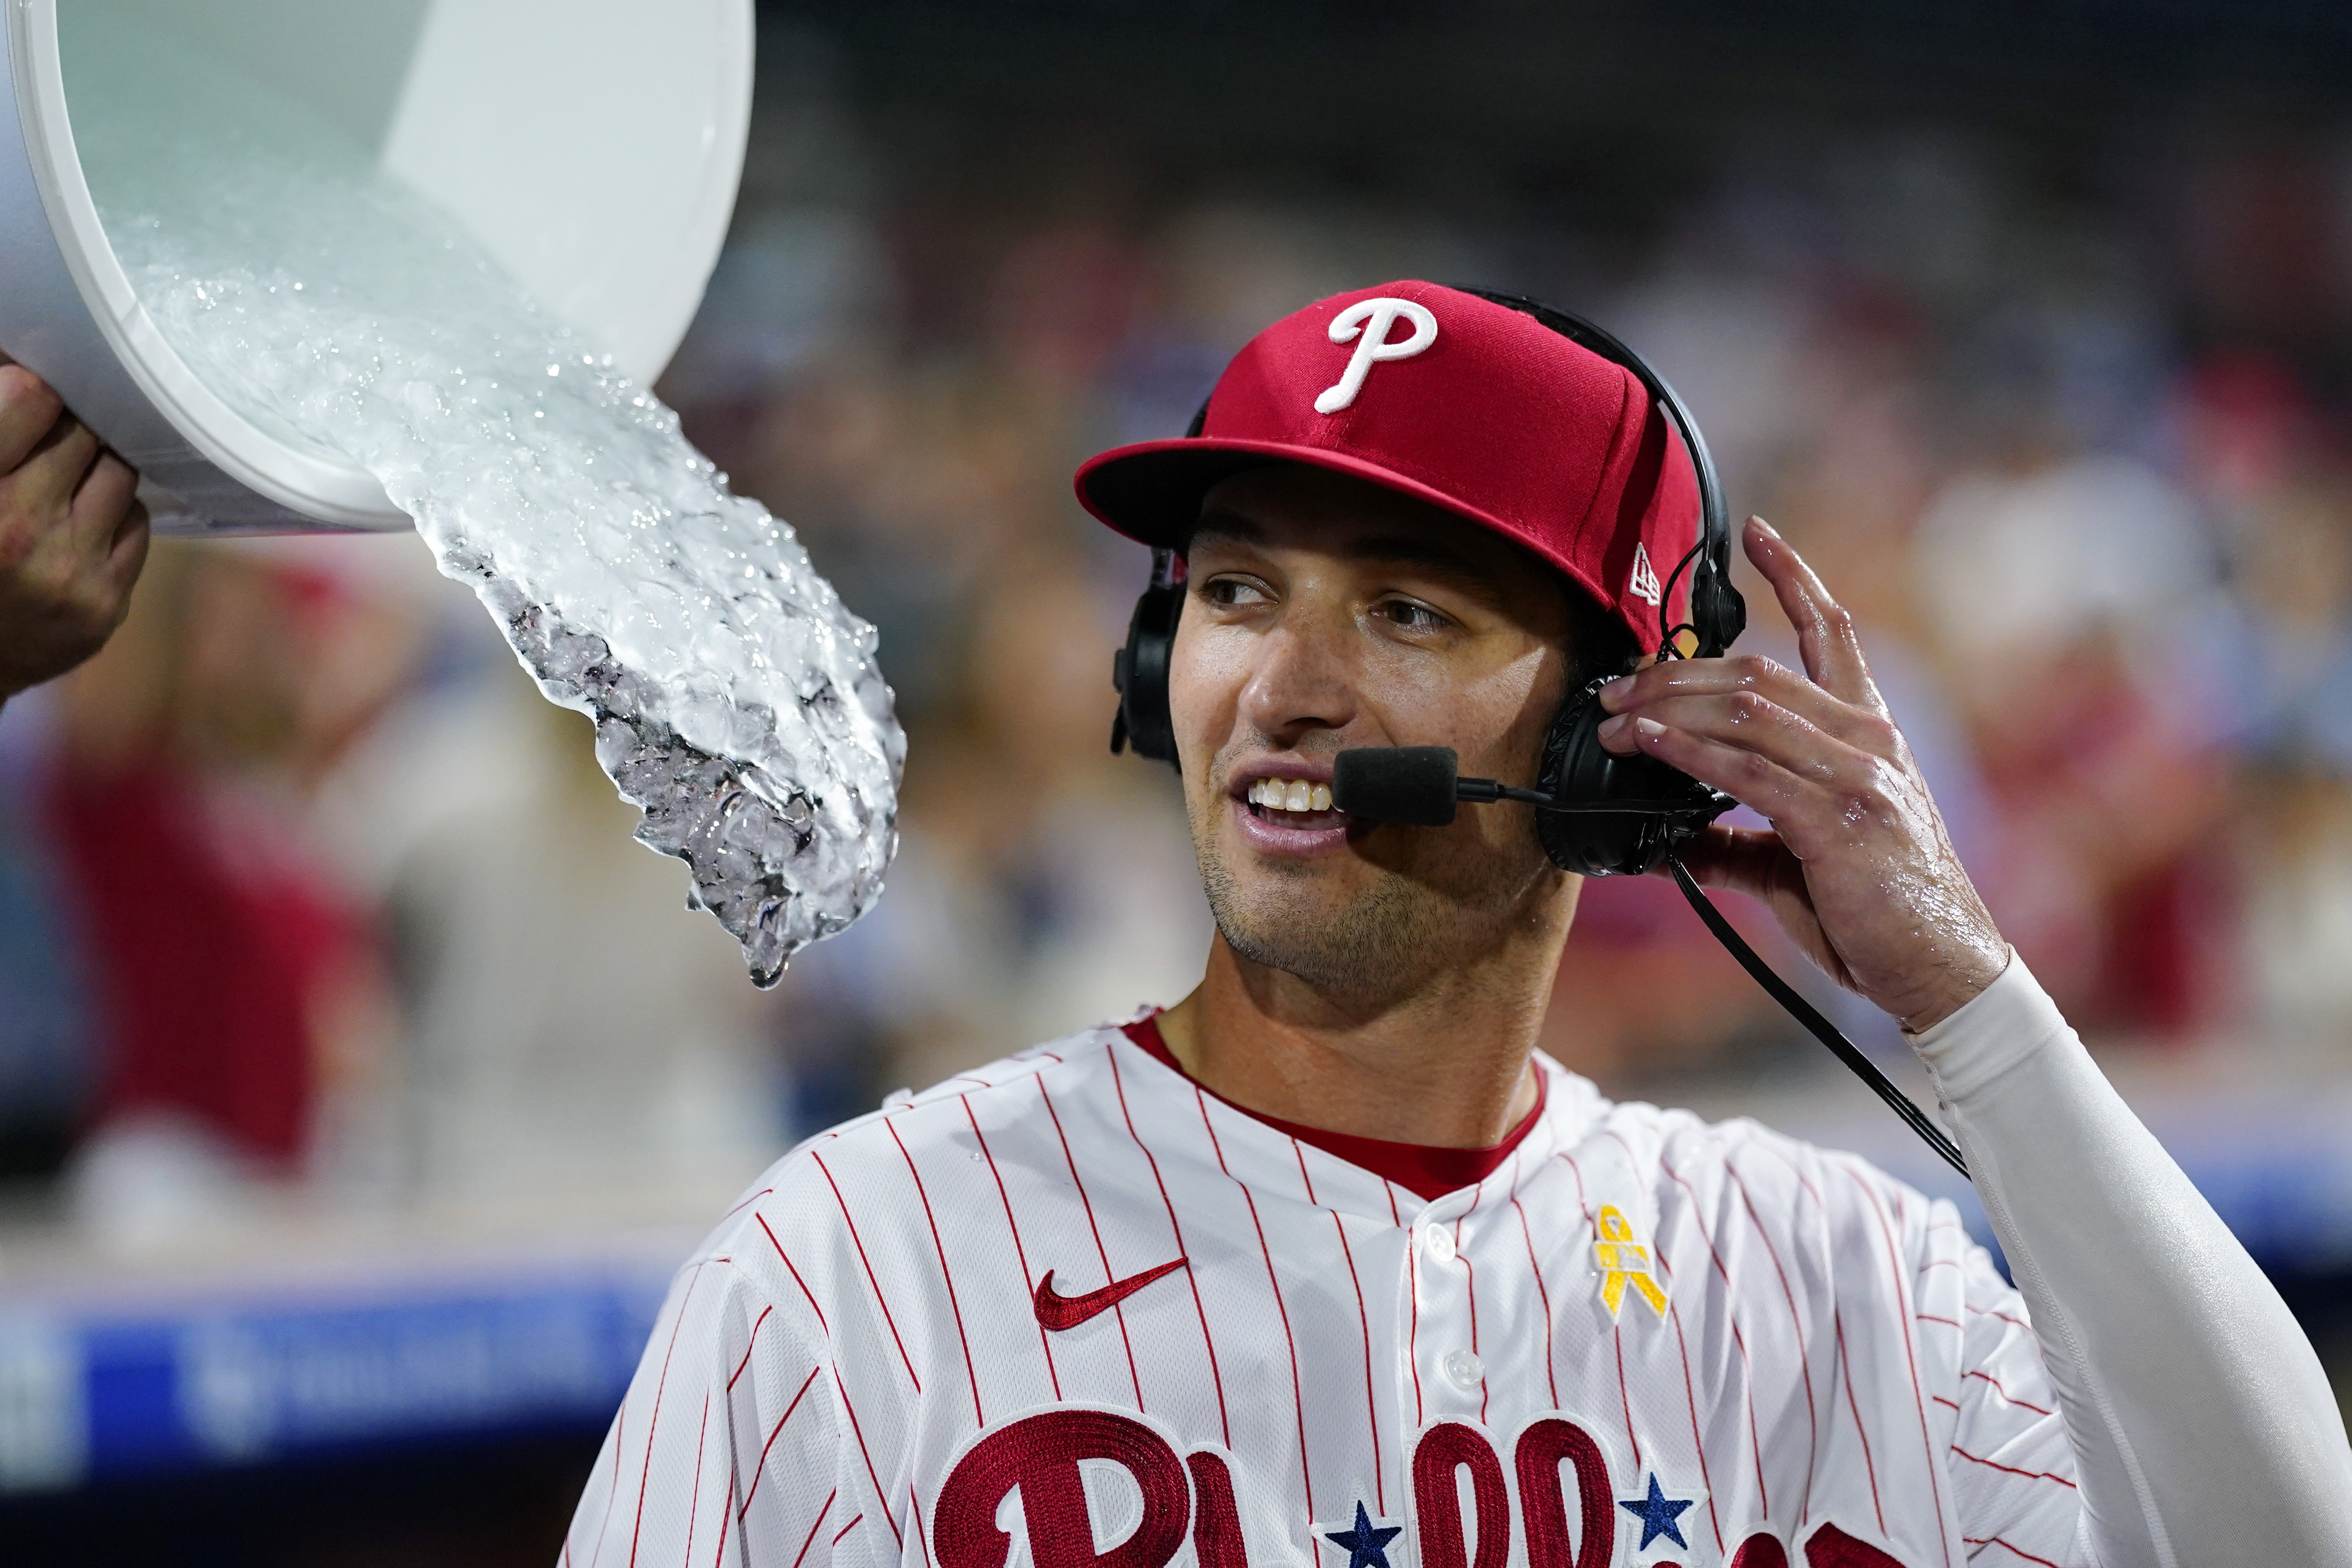 Nationals vs. Phillies prediction, betting odds for MLB on Saturday 